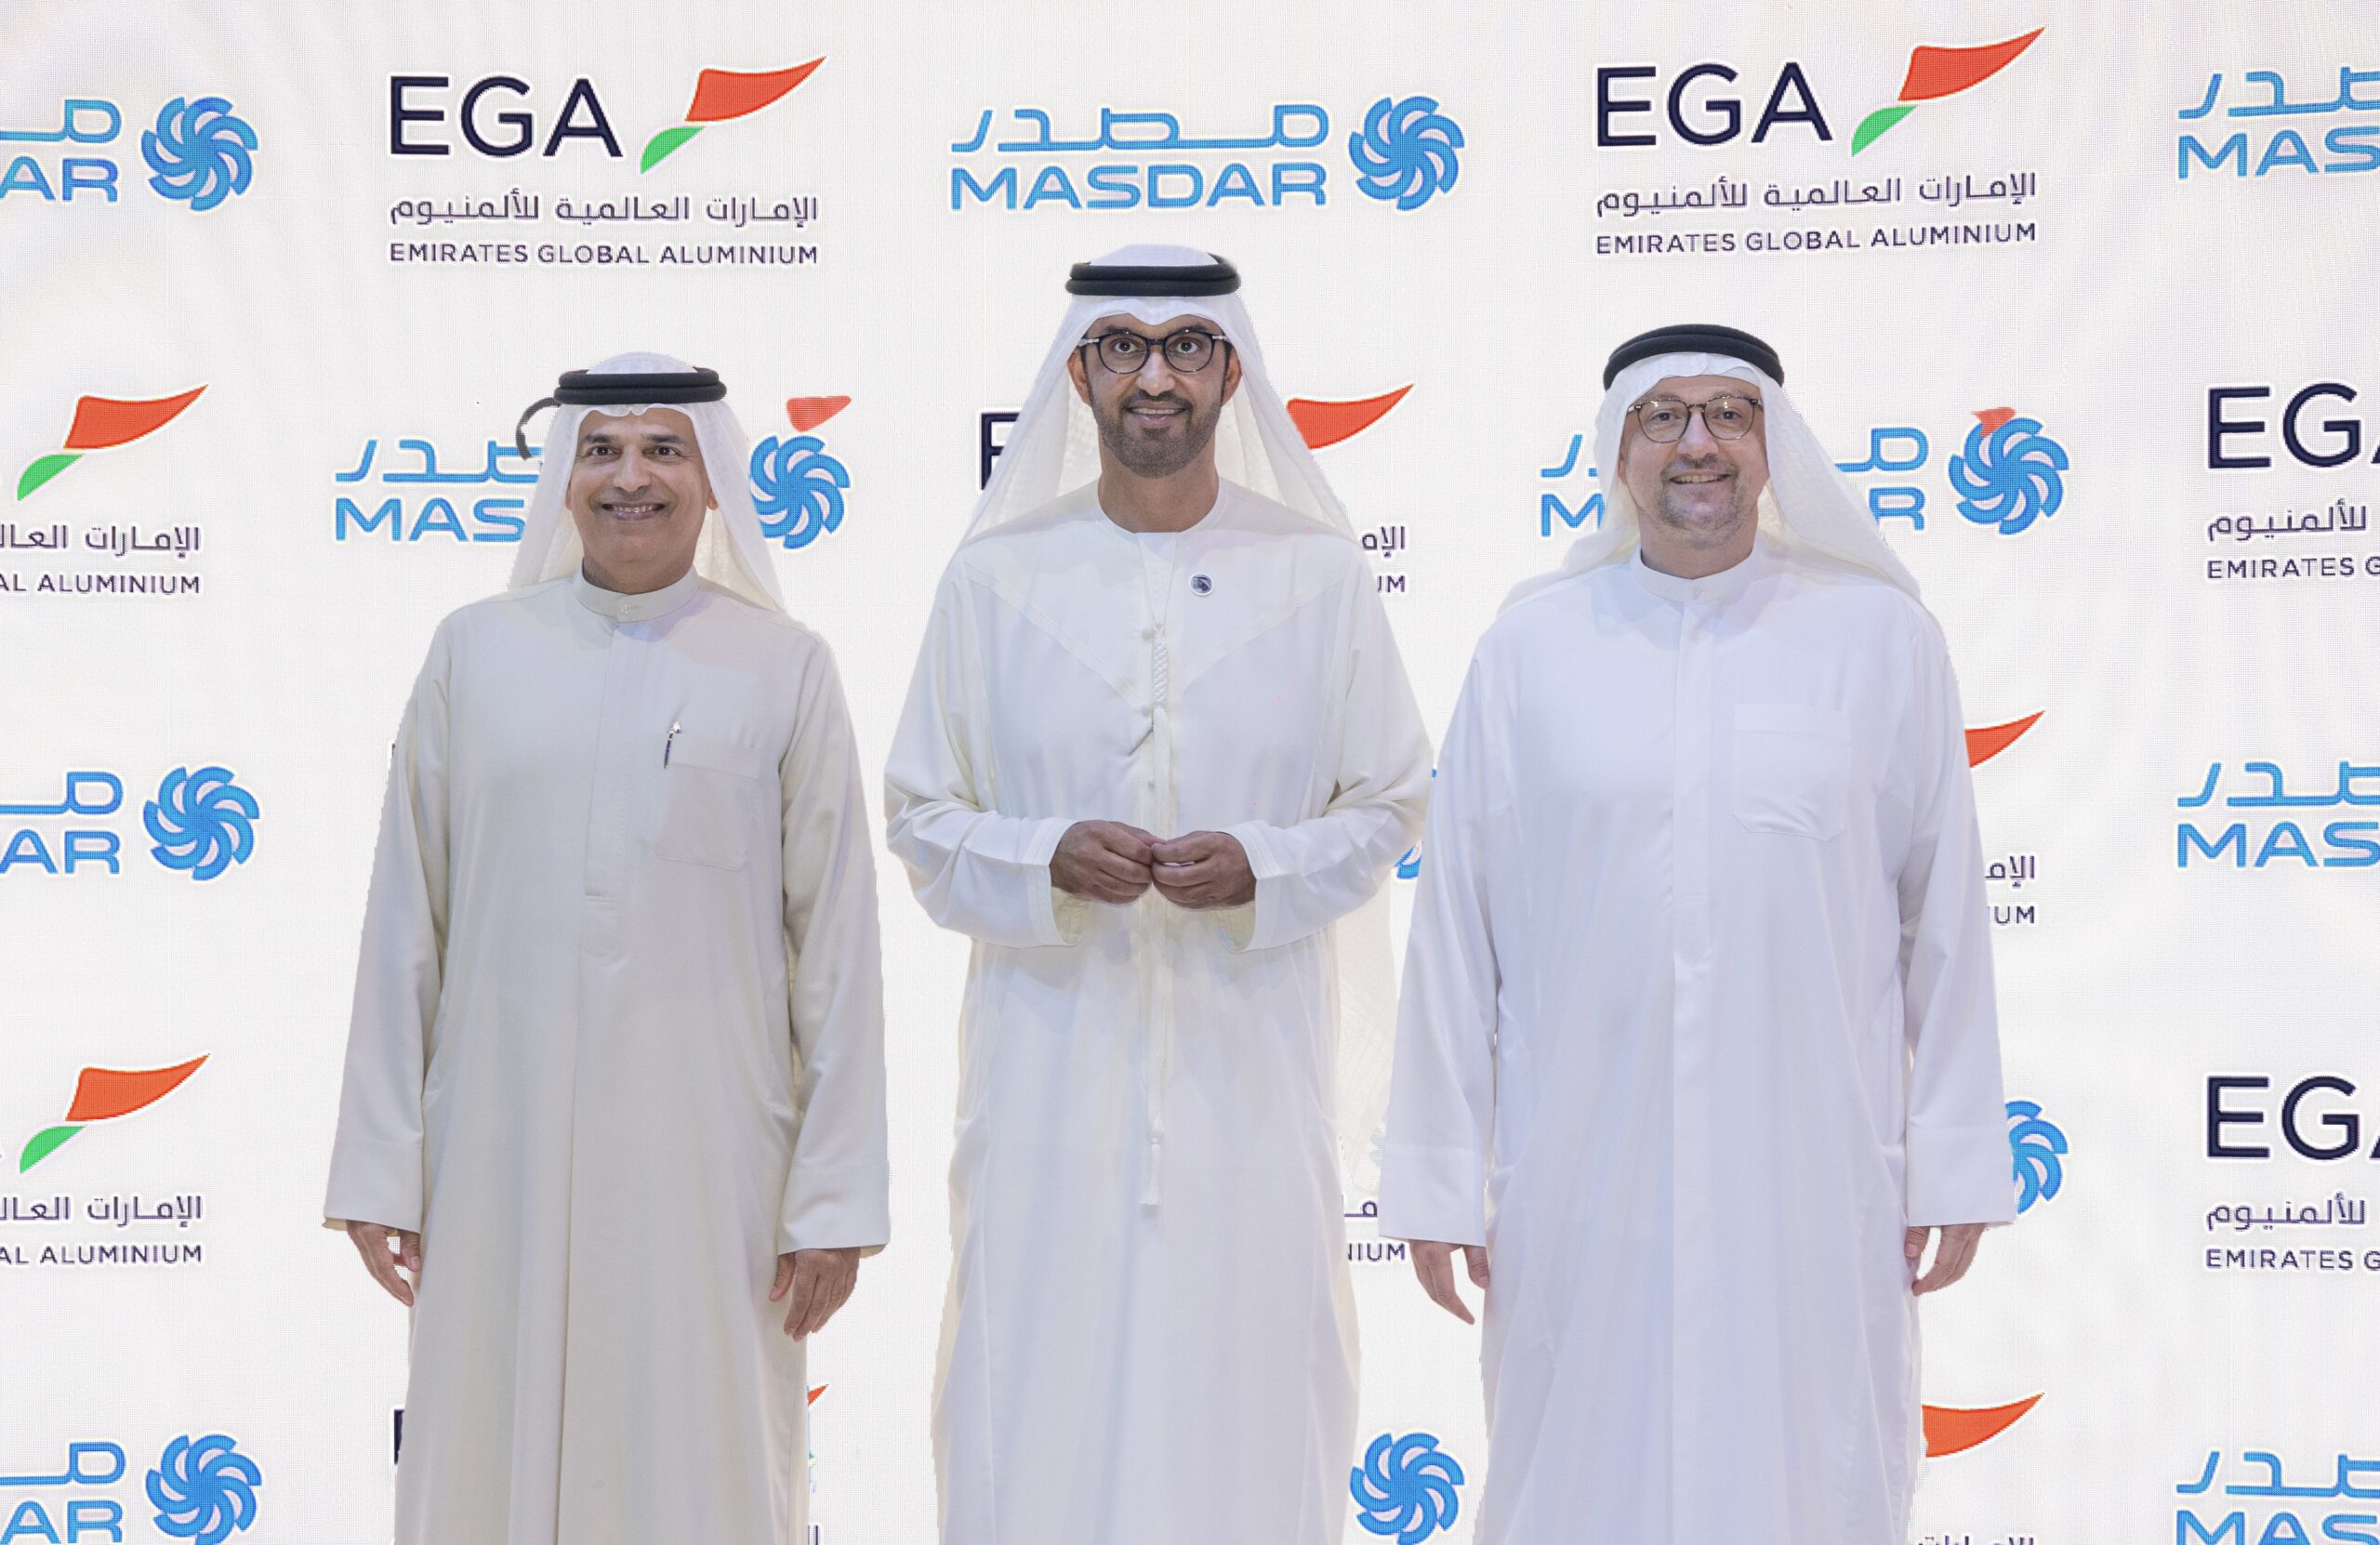 Image for Masdar And EGA Form Alliance To Work Together On Aluminium Decarbonisation And Growth Through Renewables